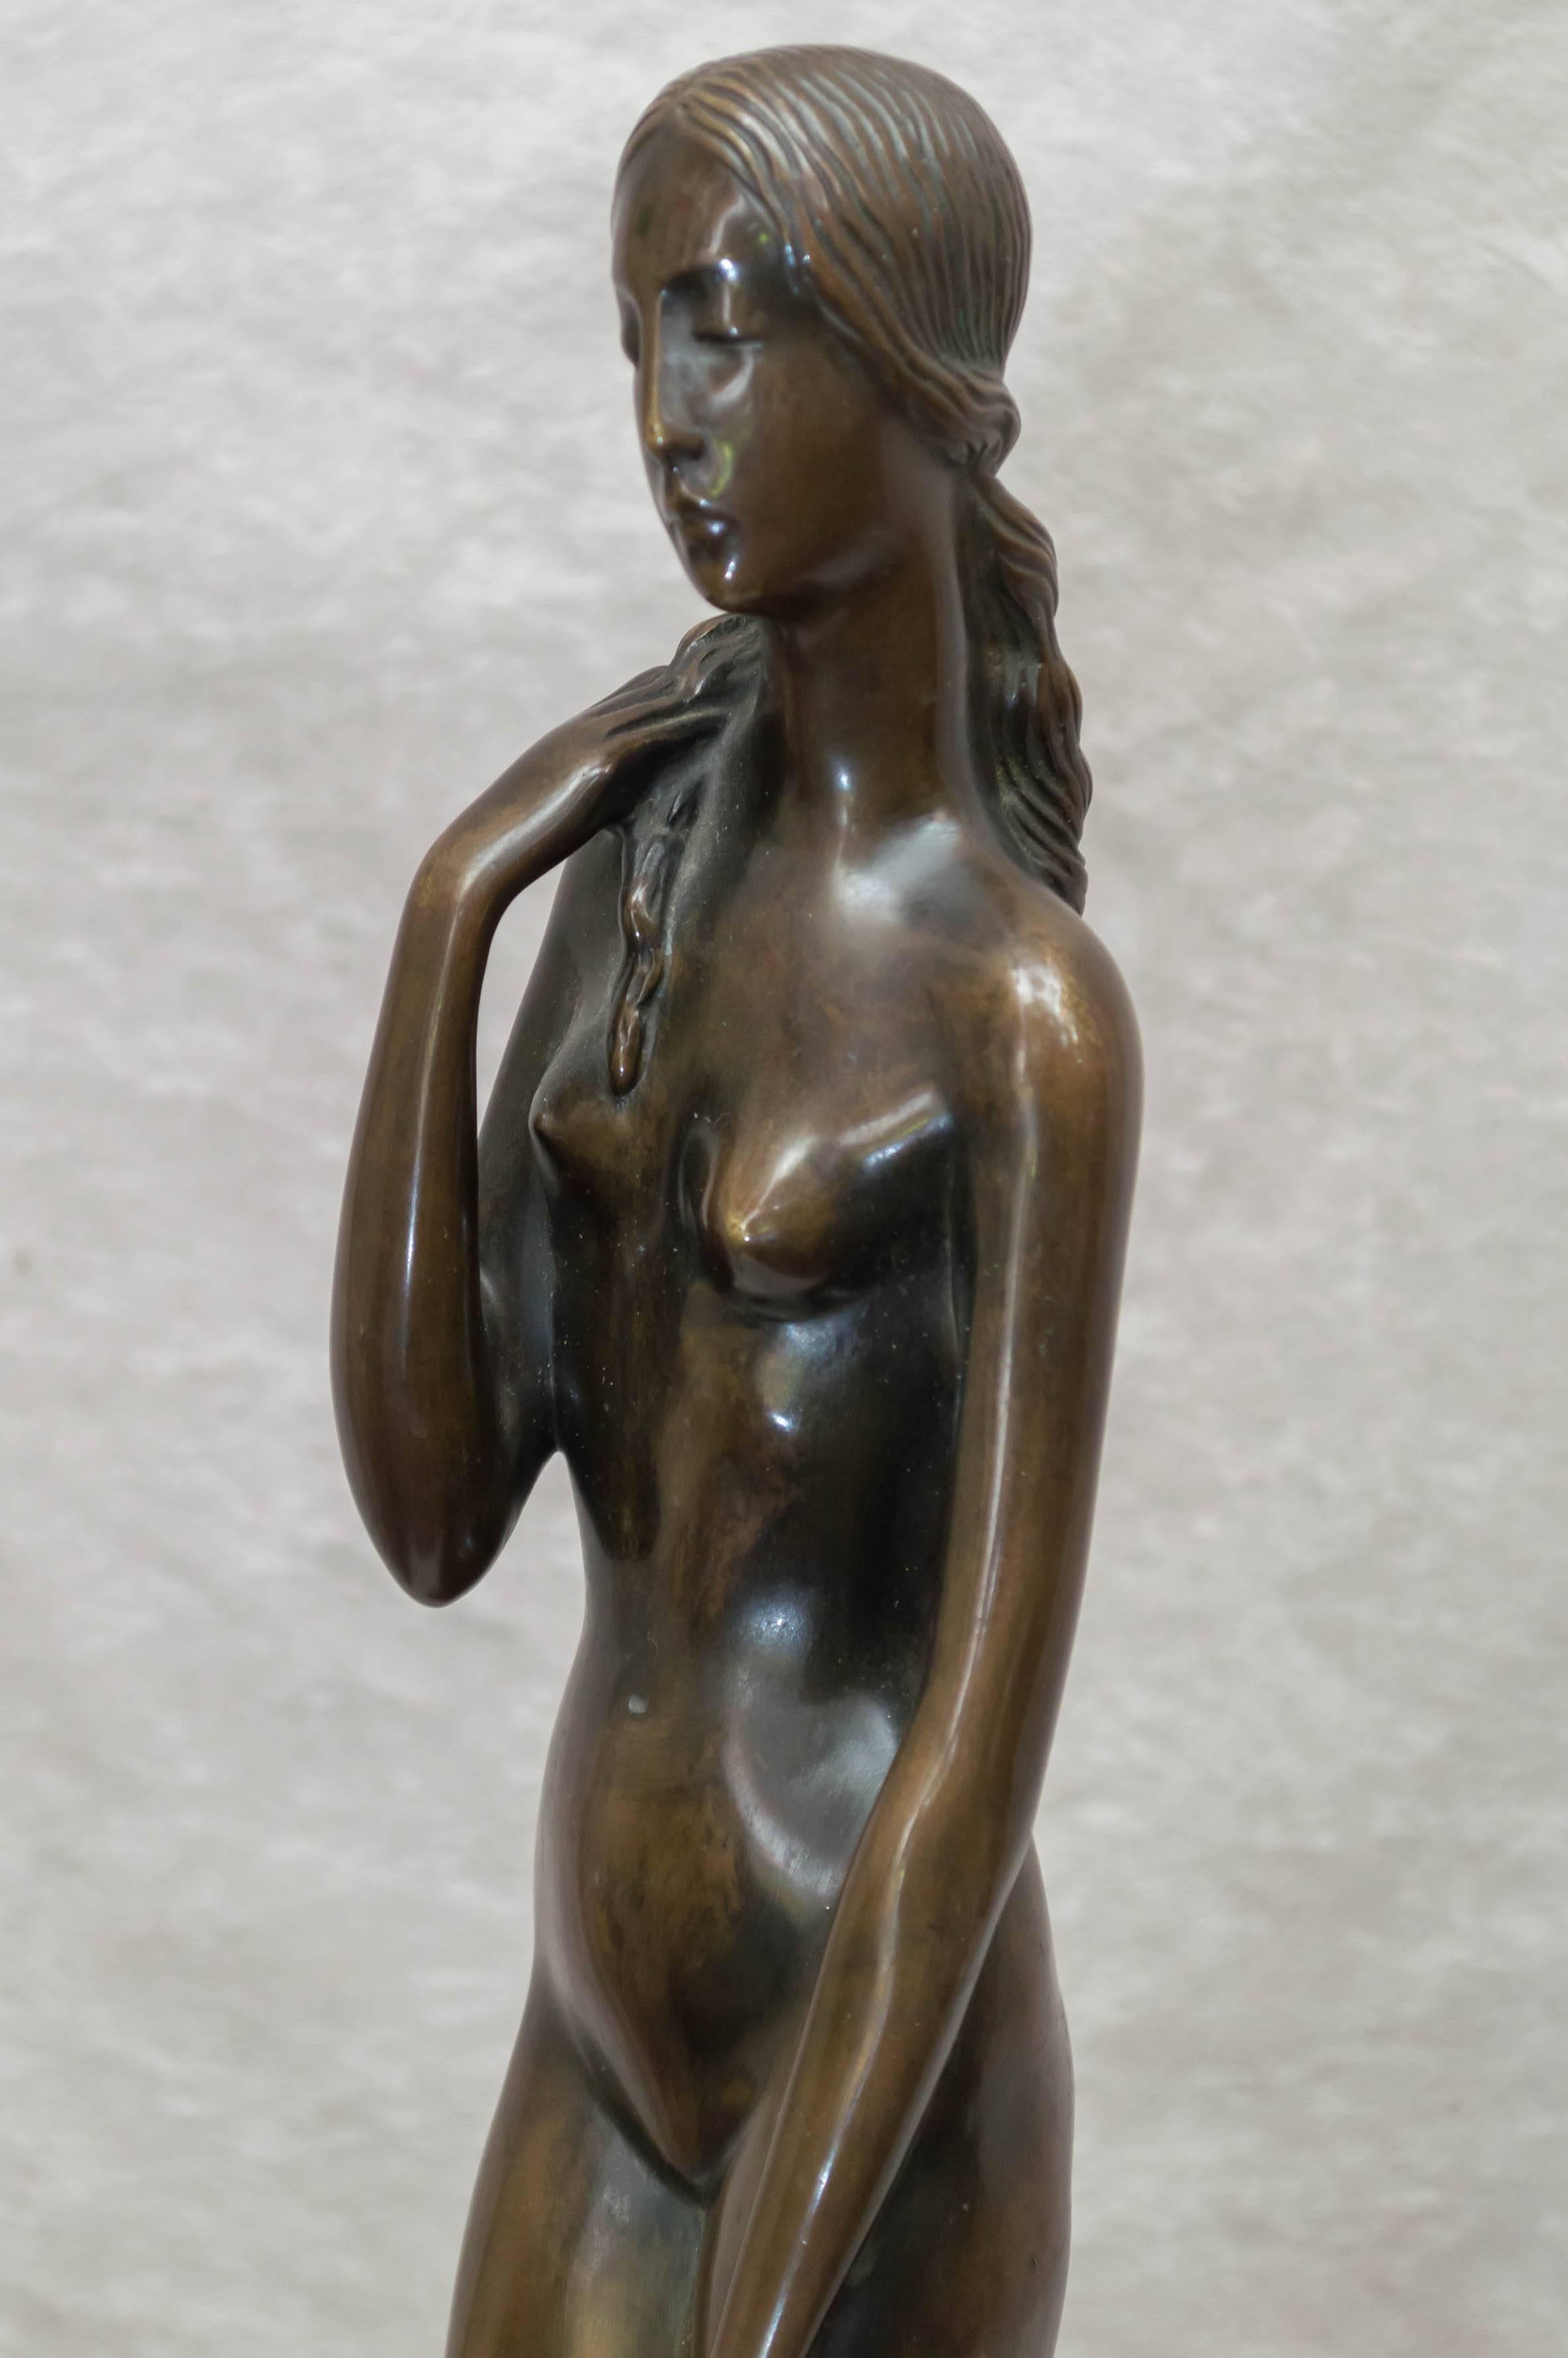 Joseph Motto was a very well regarded sculptor of his time, and still important today. This sculpture is so reminiscent of the artist's imagination and artistry. She is so very captivating and graceful. We are always searching out this fine American